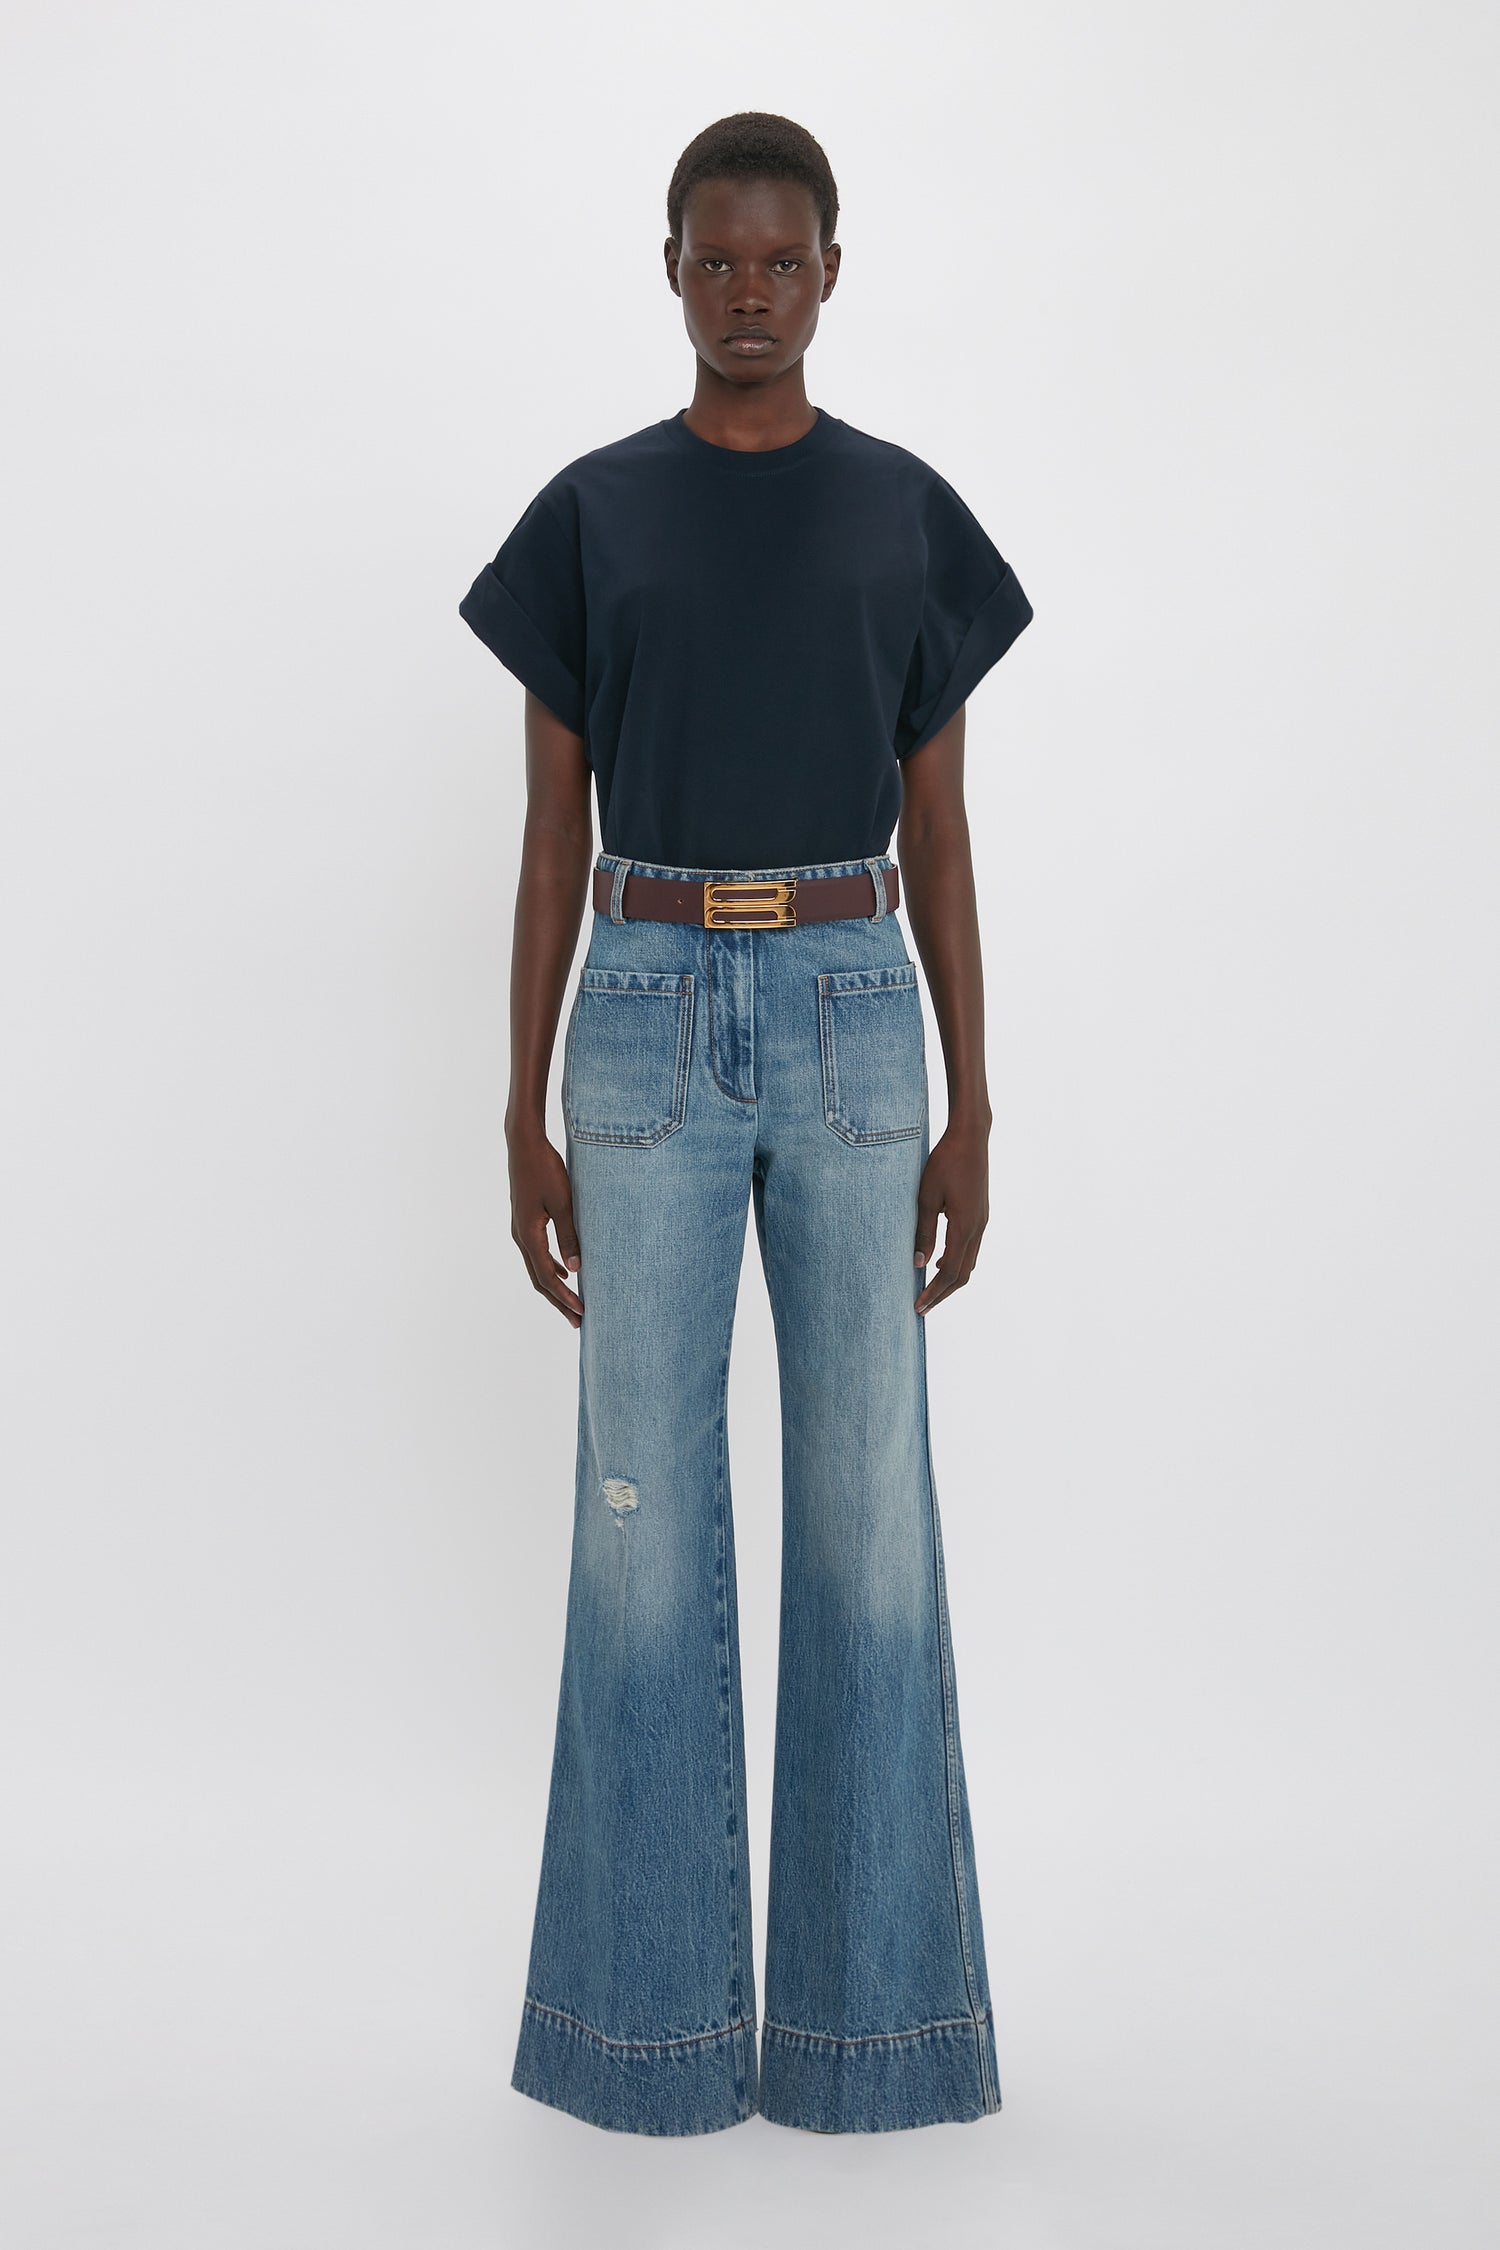 Person standing against a plain white background, wearing a dark short-sleeved Victoria Beckham Asymmetric Relaxed Fit T-Shirt In Navy and high-waisted, wide-leg blue jeans with a brown belt.